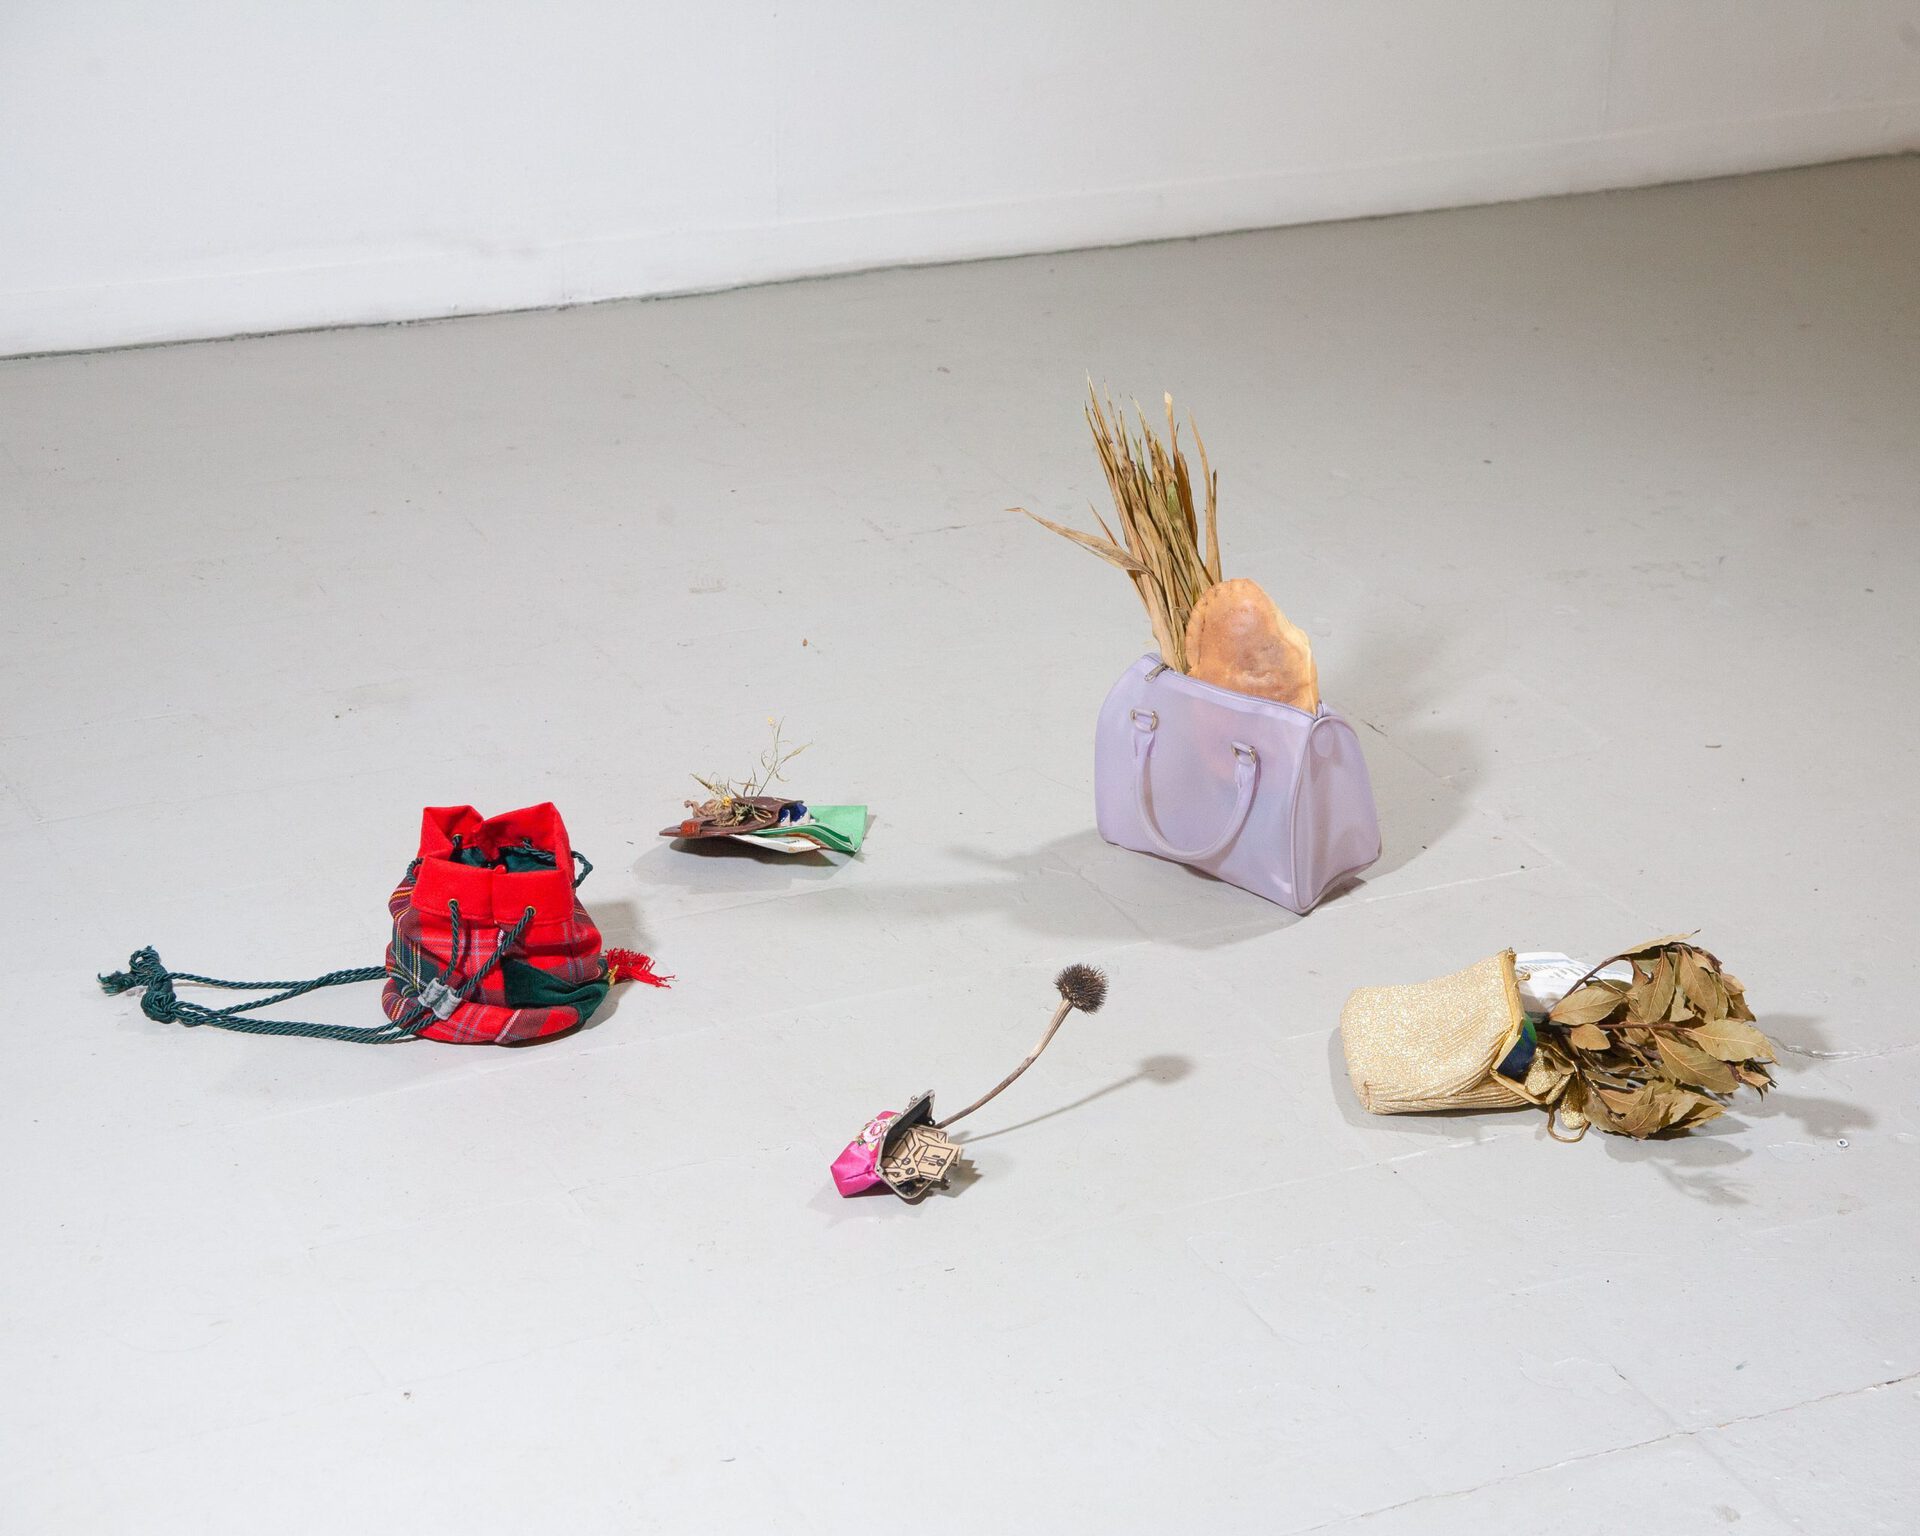 Daniele Formica, "harvest bags" , 2020/21, 3 purses, 2 wallets, crab head (cancer pagurus), Yucca leaves, stone, laurel branch, mixed shrubs, cardboard cut-outs, gloves, globe-shaped rubber stress-ball, paper napkin from Greek restaurant, ceramic house miniature, dry yam, silica gel bag, napkin, 10 cents.